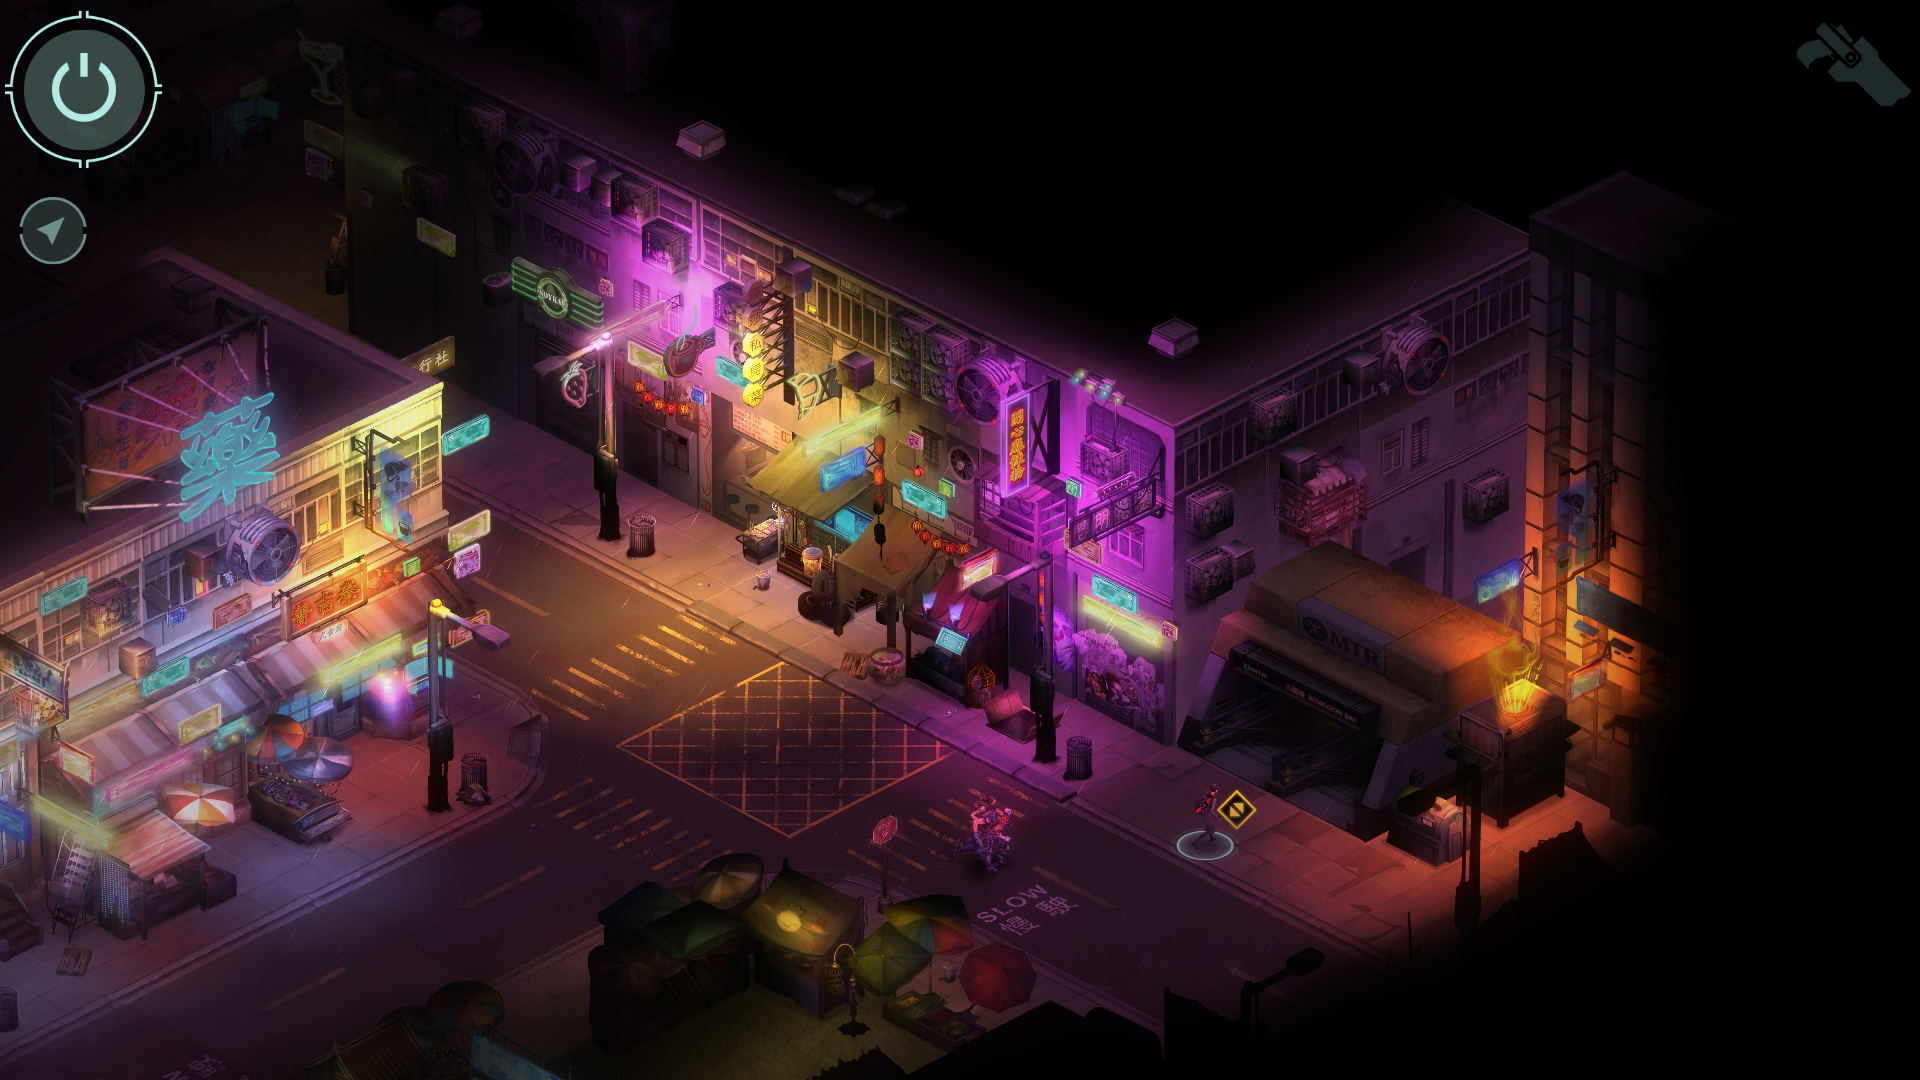 All cyberpunk heads to Hong Kong eventually. Shadowrun does it right - Kill  Screen - Previously